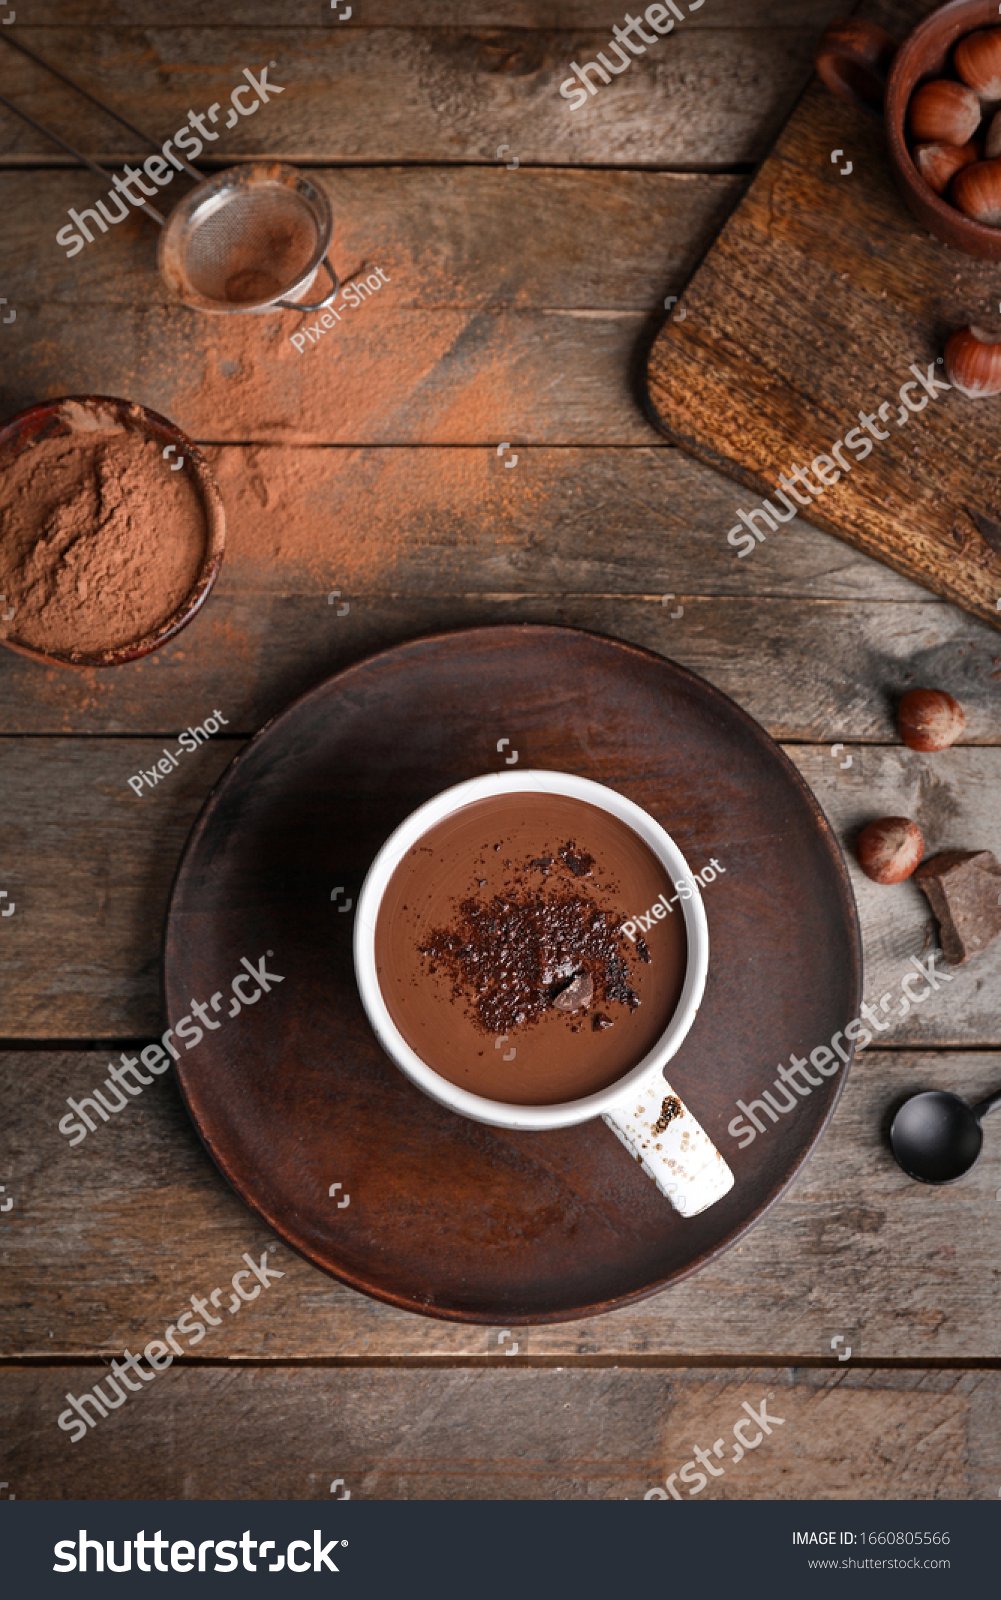 Cup of hot chocolate on wooden table #1660805566